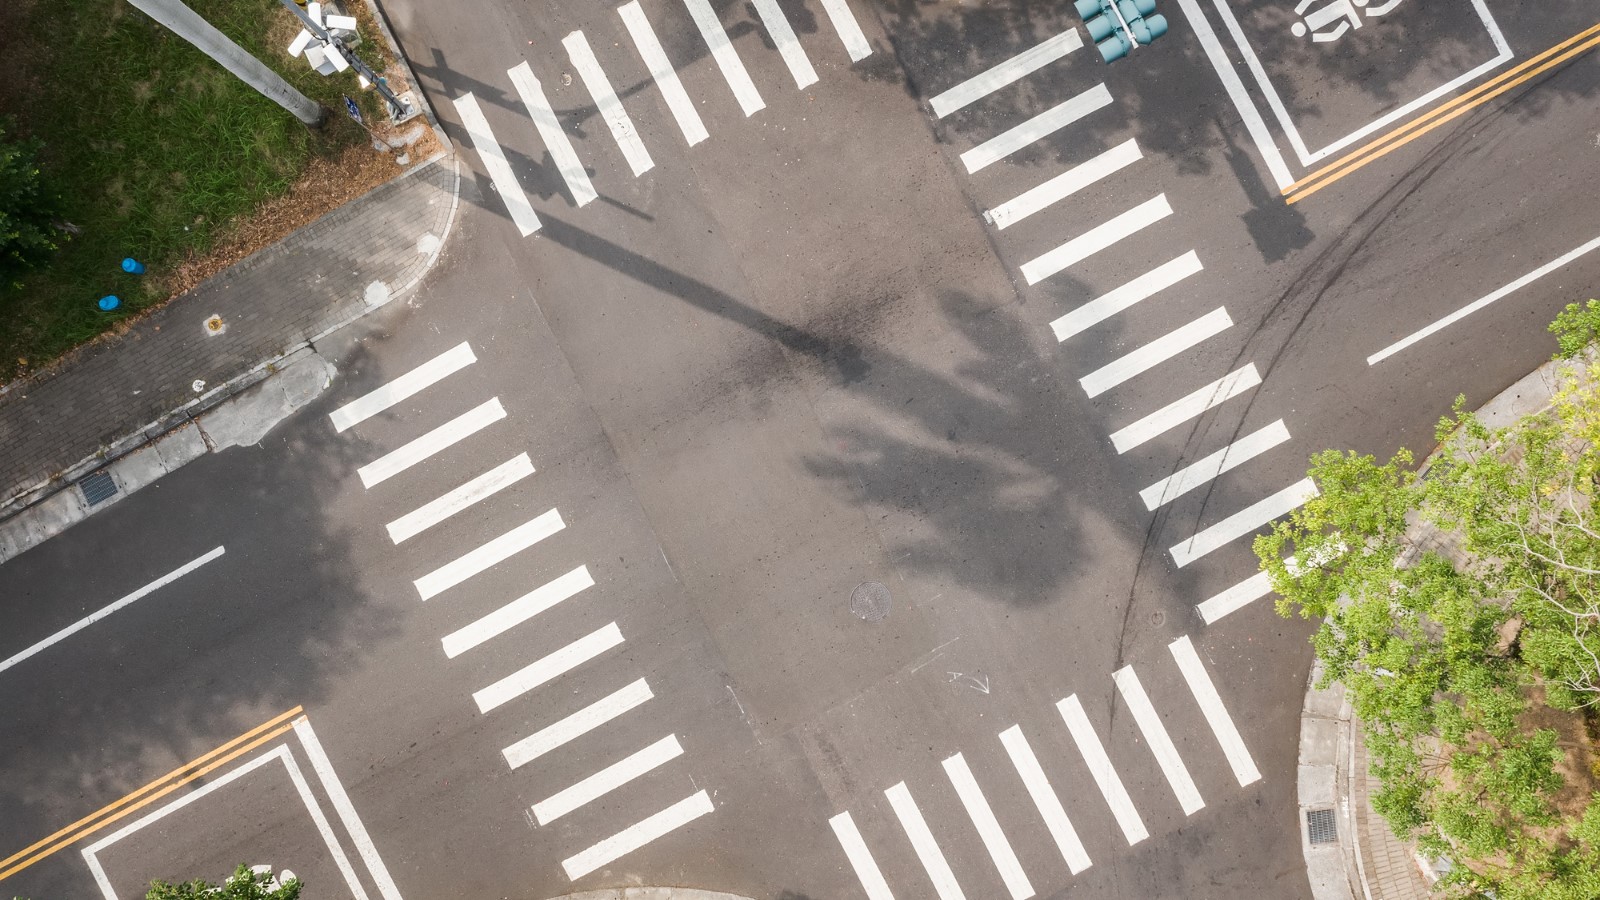 Overhead image of a traffic intersection.